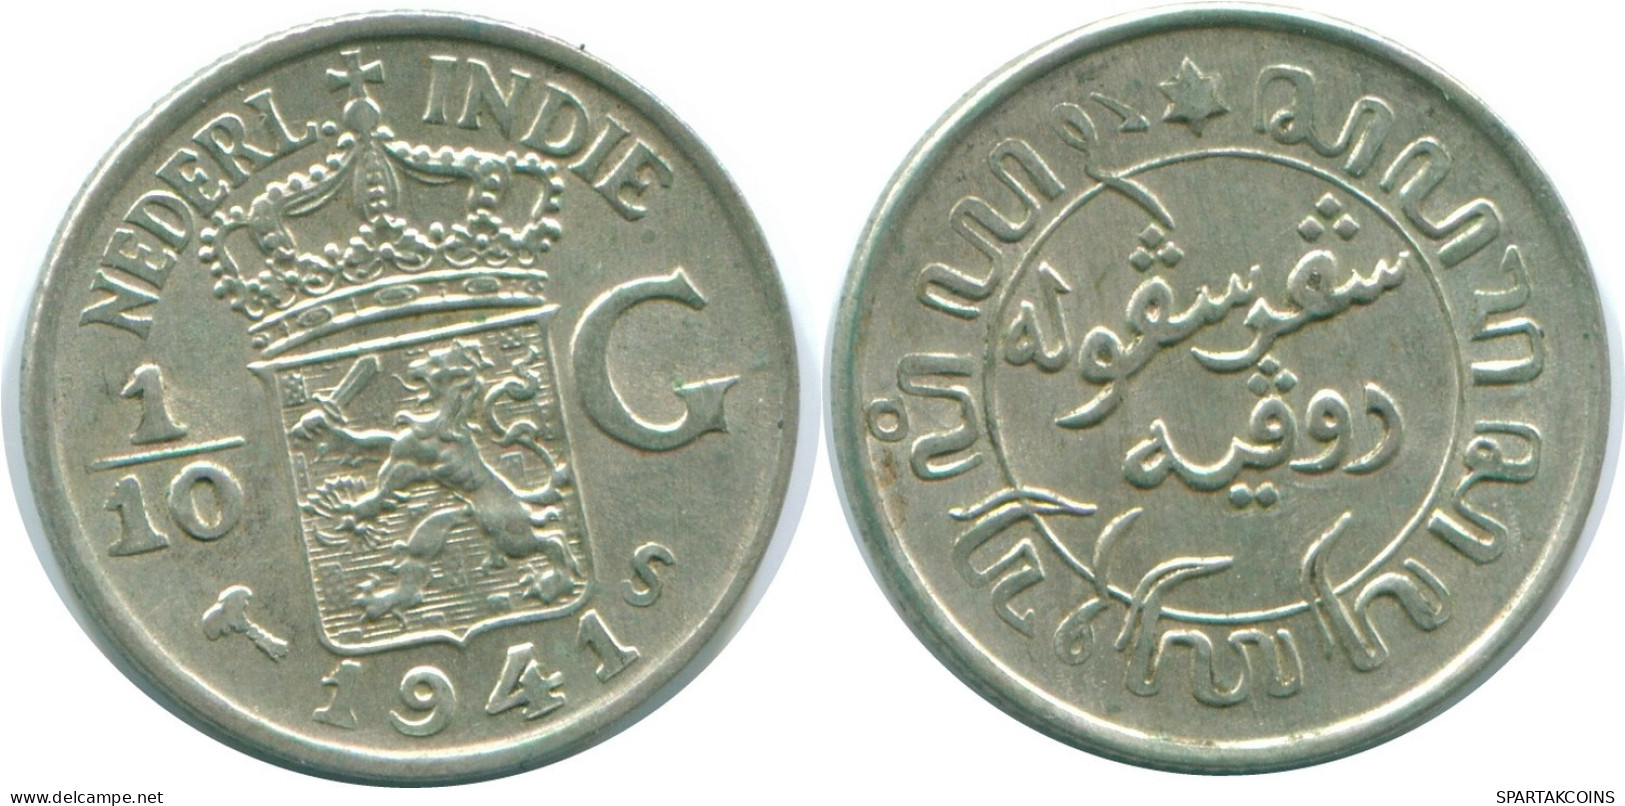 1/10 GULDEN 1941 S NETHERLANDS EAST INDIES SILVER Colonial Coin #NL13618.3.U.A - Indes Neerlandesas